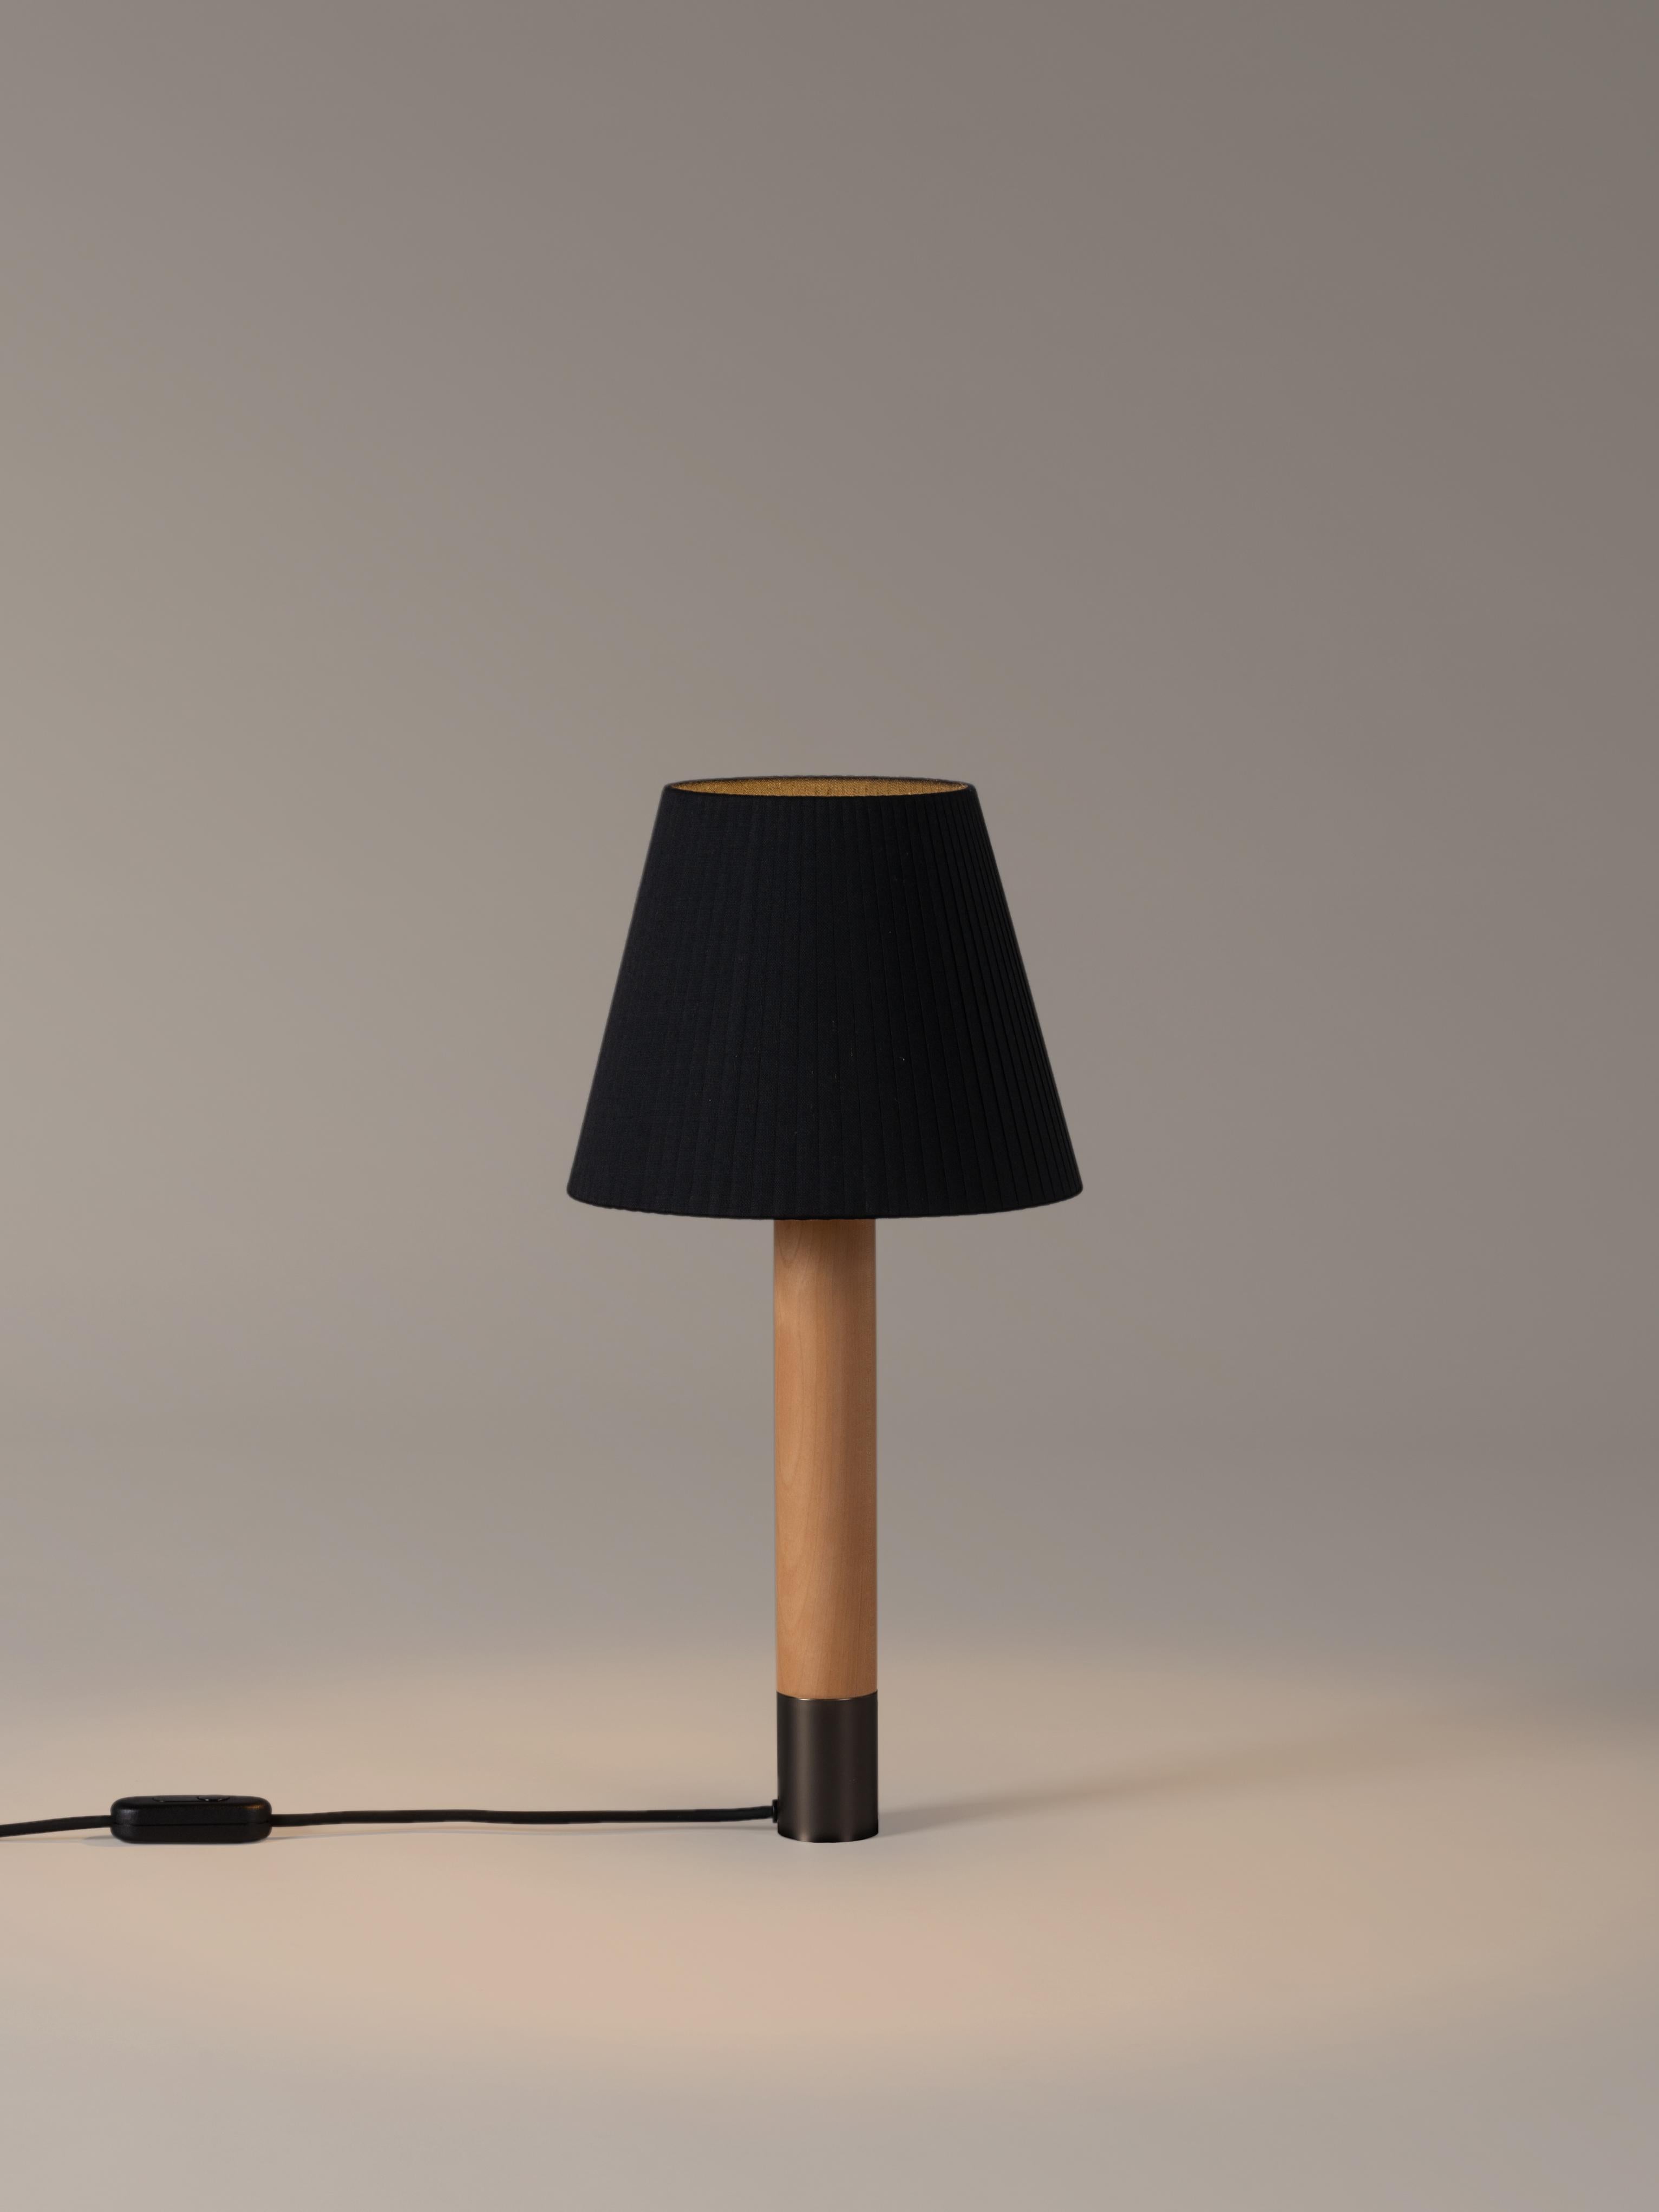 Bronze and Black Básica M1 table lamp by Santiago Roqueta, Santa & Cole
Dimensions: D 25 x H 52 cm
Materials: Bronze, birch wood, ribbon.
Available in other shade colors and with or without the stabilizing disc.
Available in nickel or